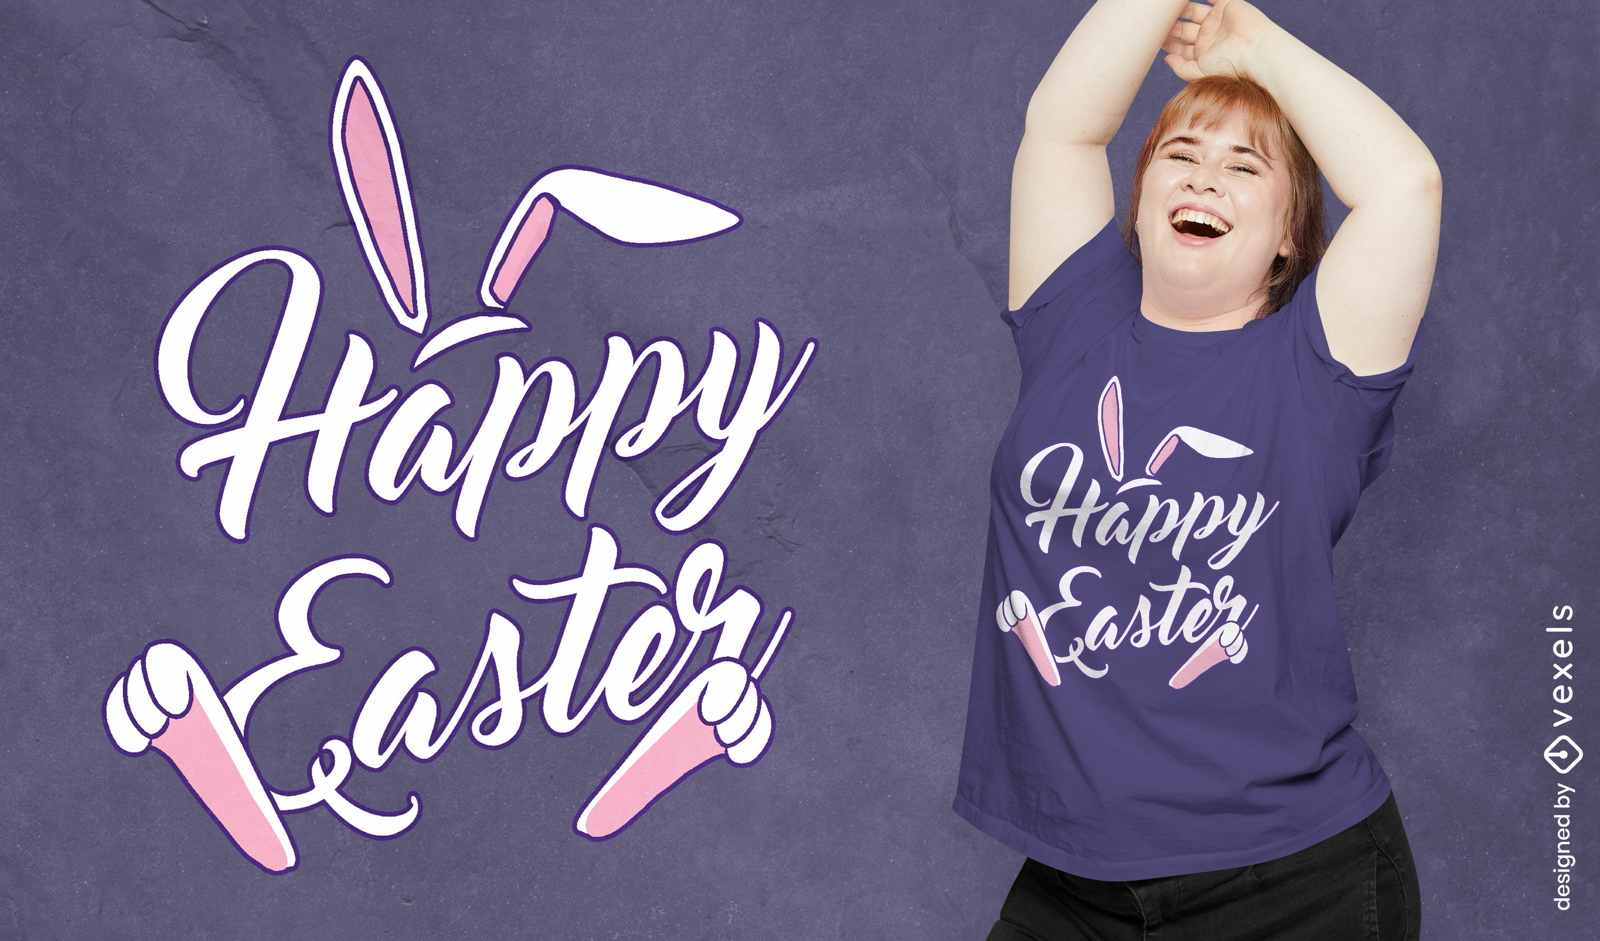 Happy Easter wishes t-shirt design